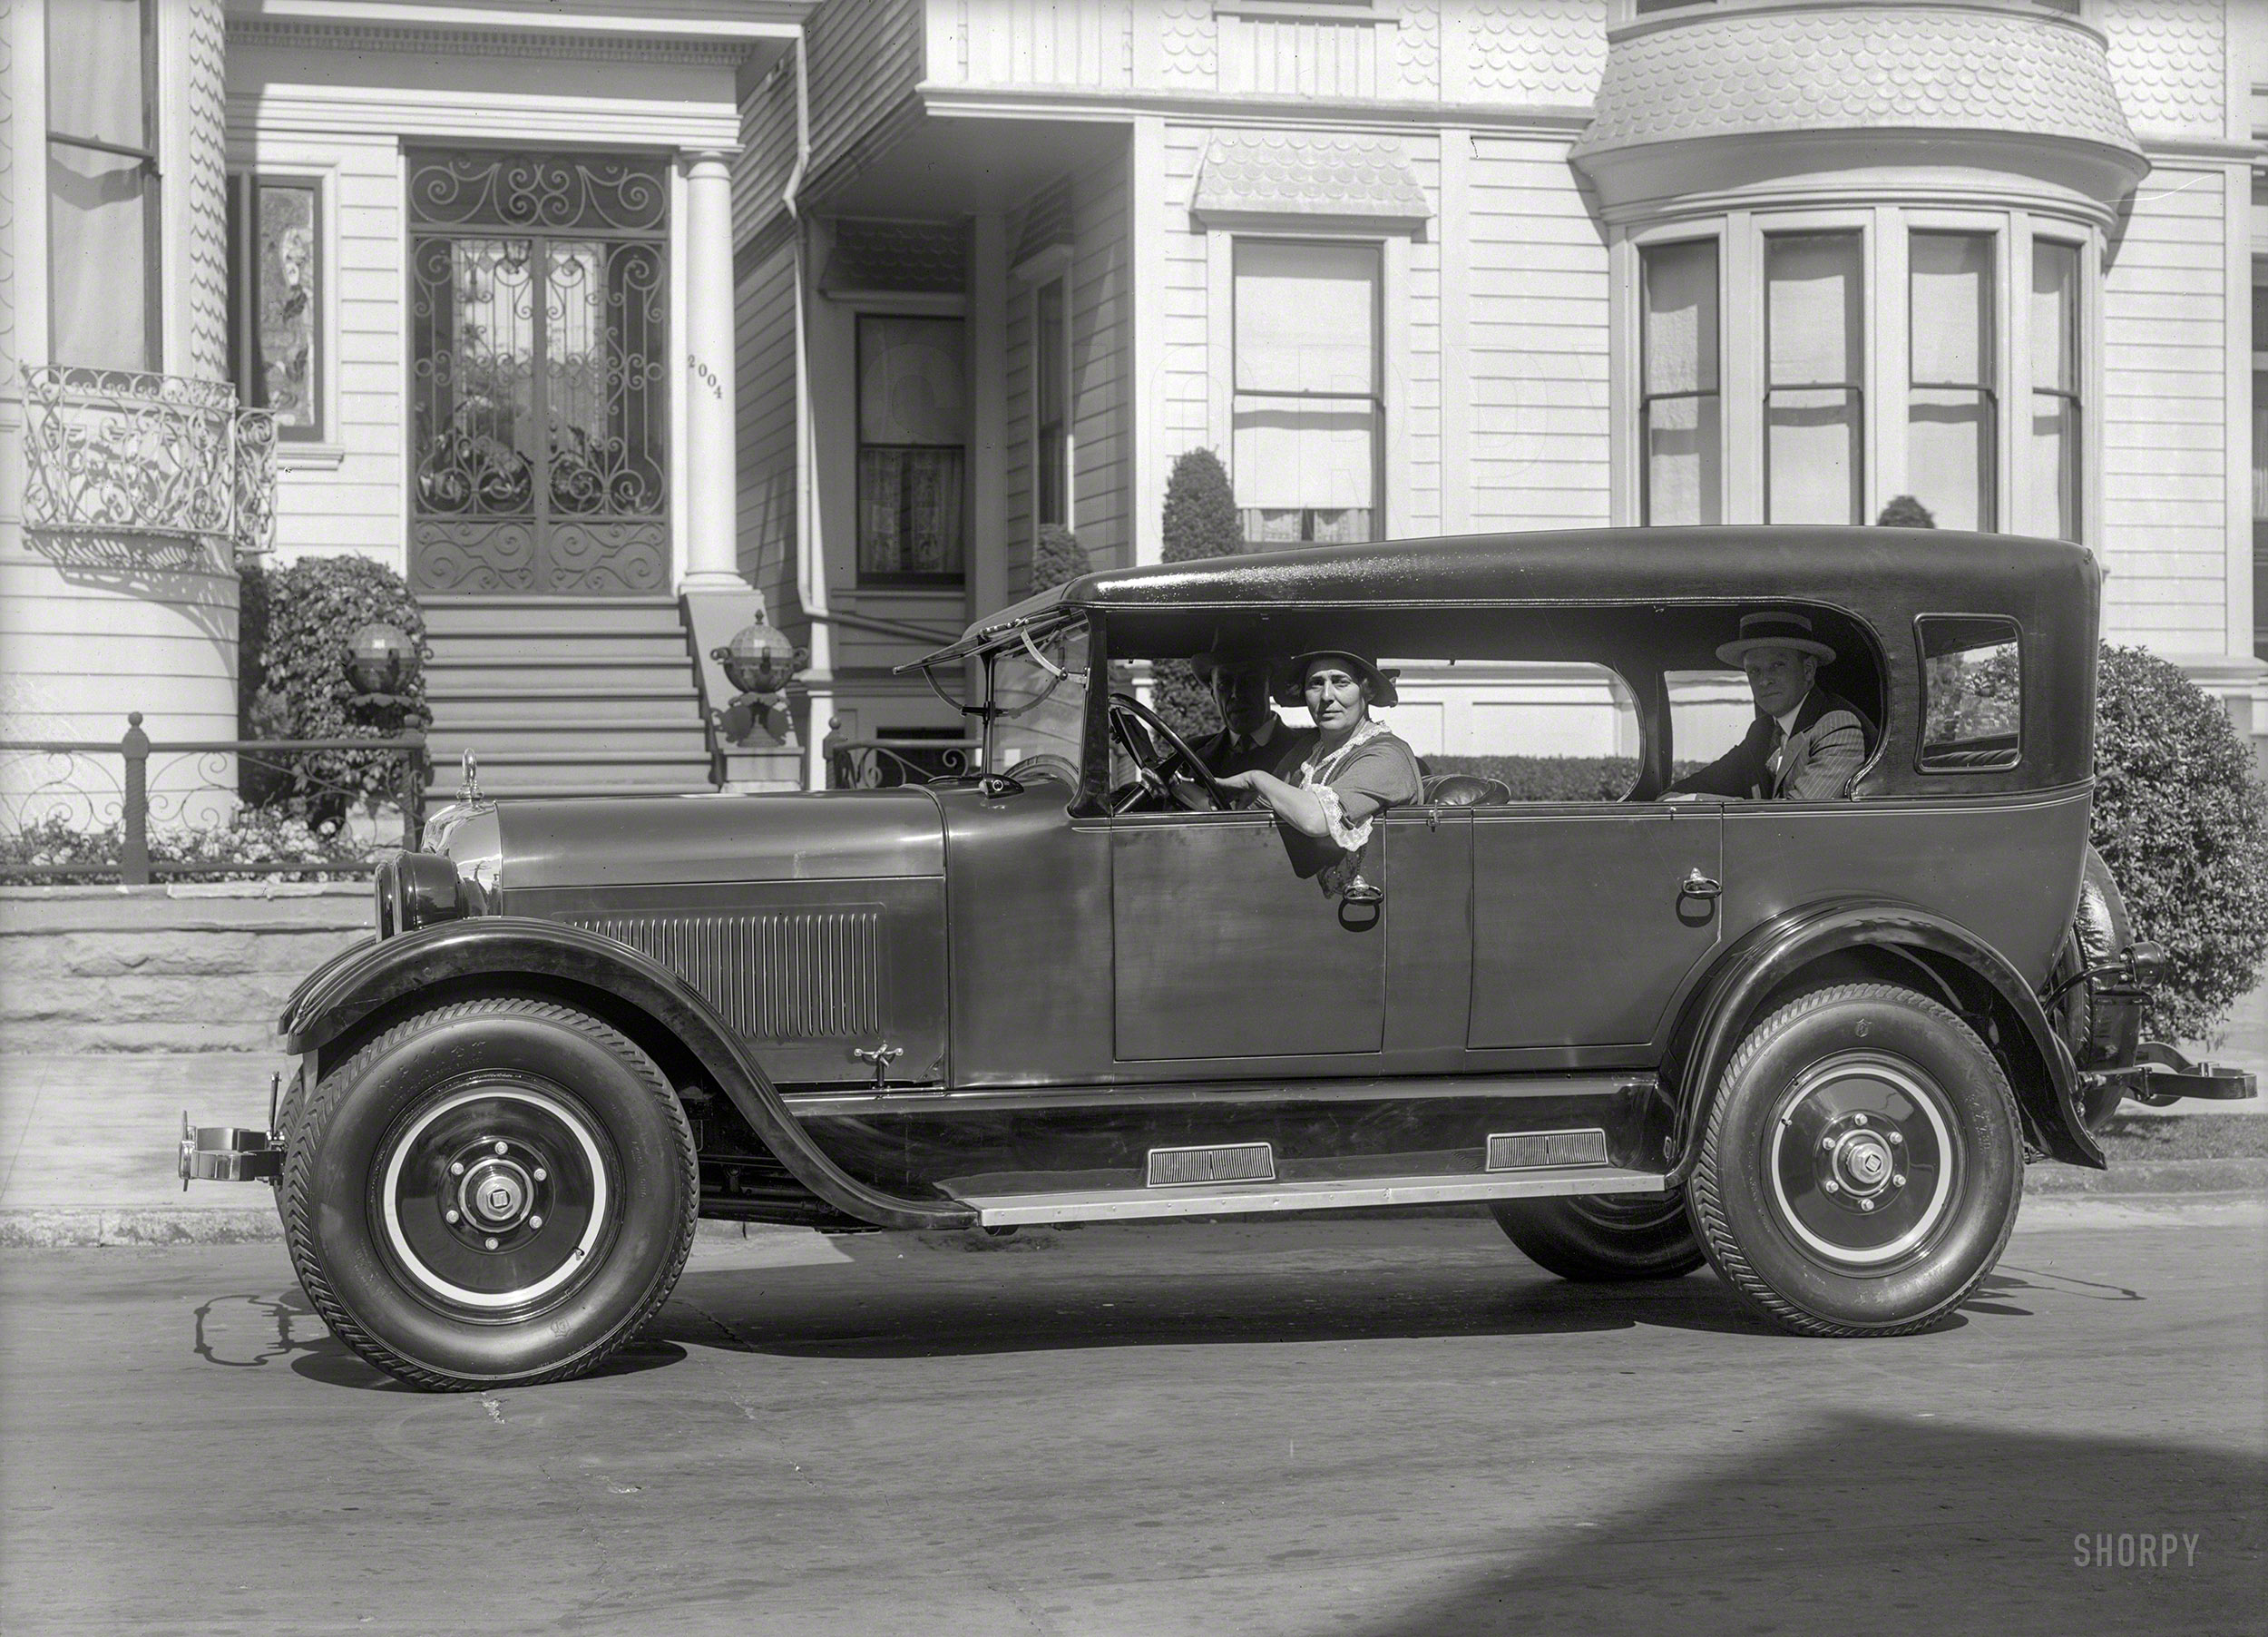 San Francisco circa 1924. "Studebaker Special Six Duplex-Phaeton." Mother says to get in or we're leaving without you. 5x7 inch glass negative. View full size.